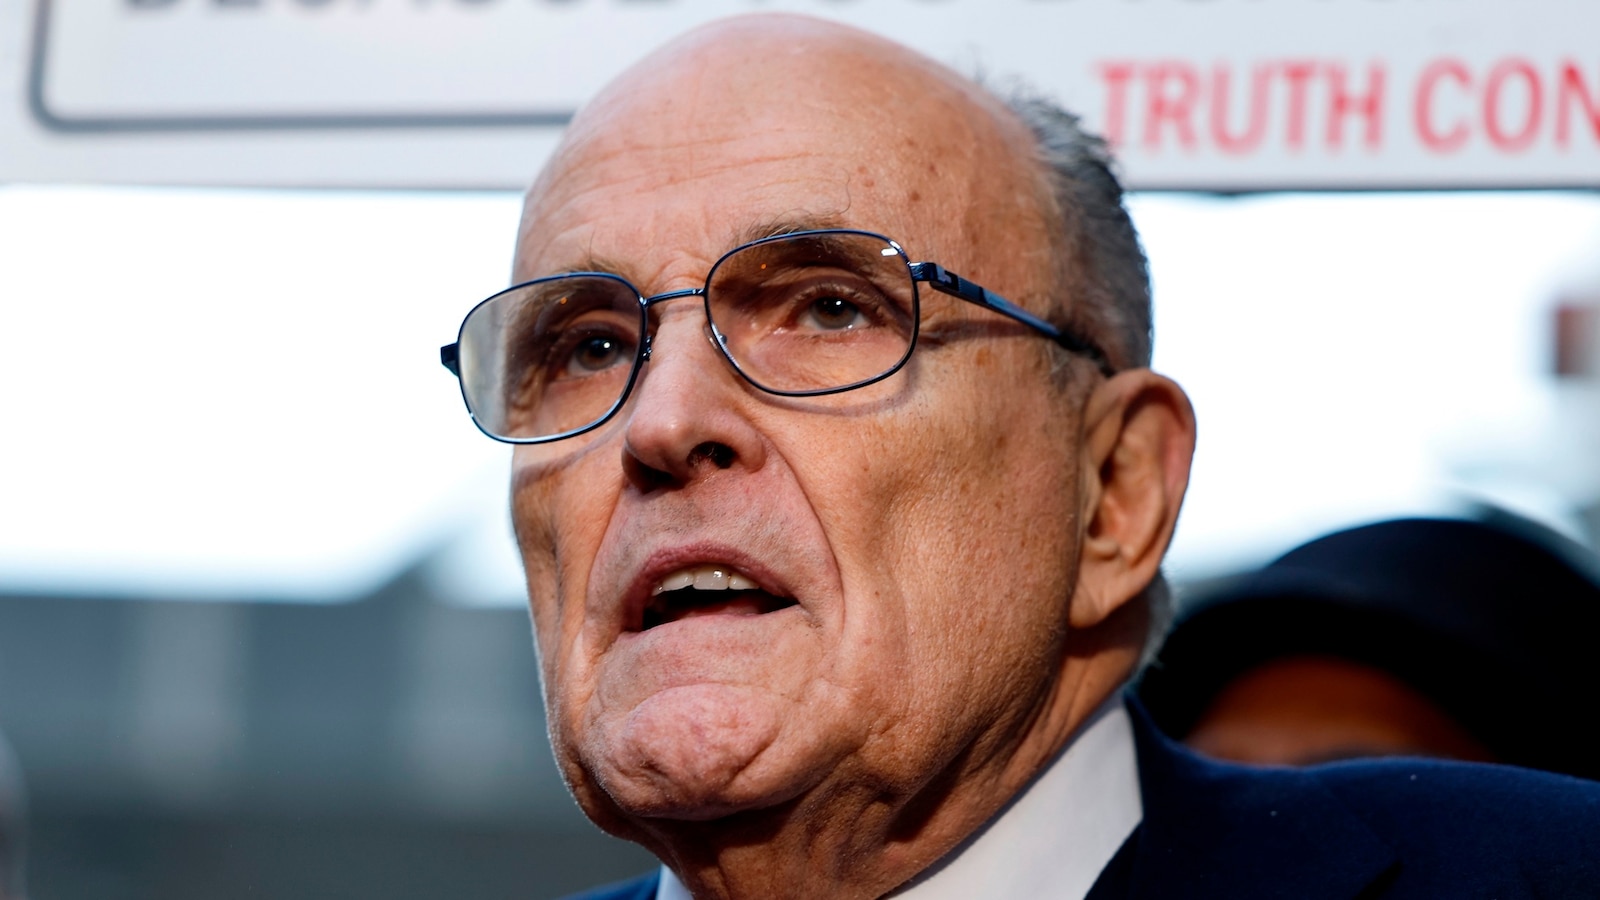 Rudy Giuliani's bankruptcy case appears likely to be dismissed by judge